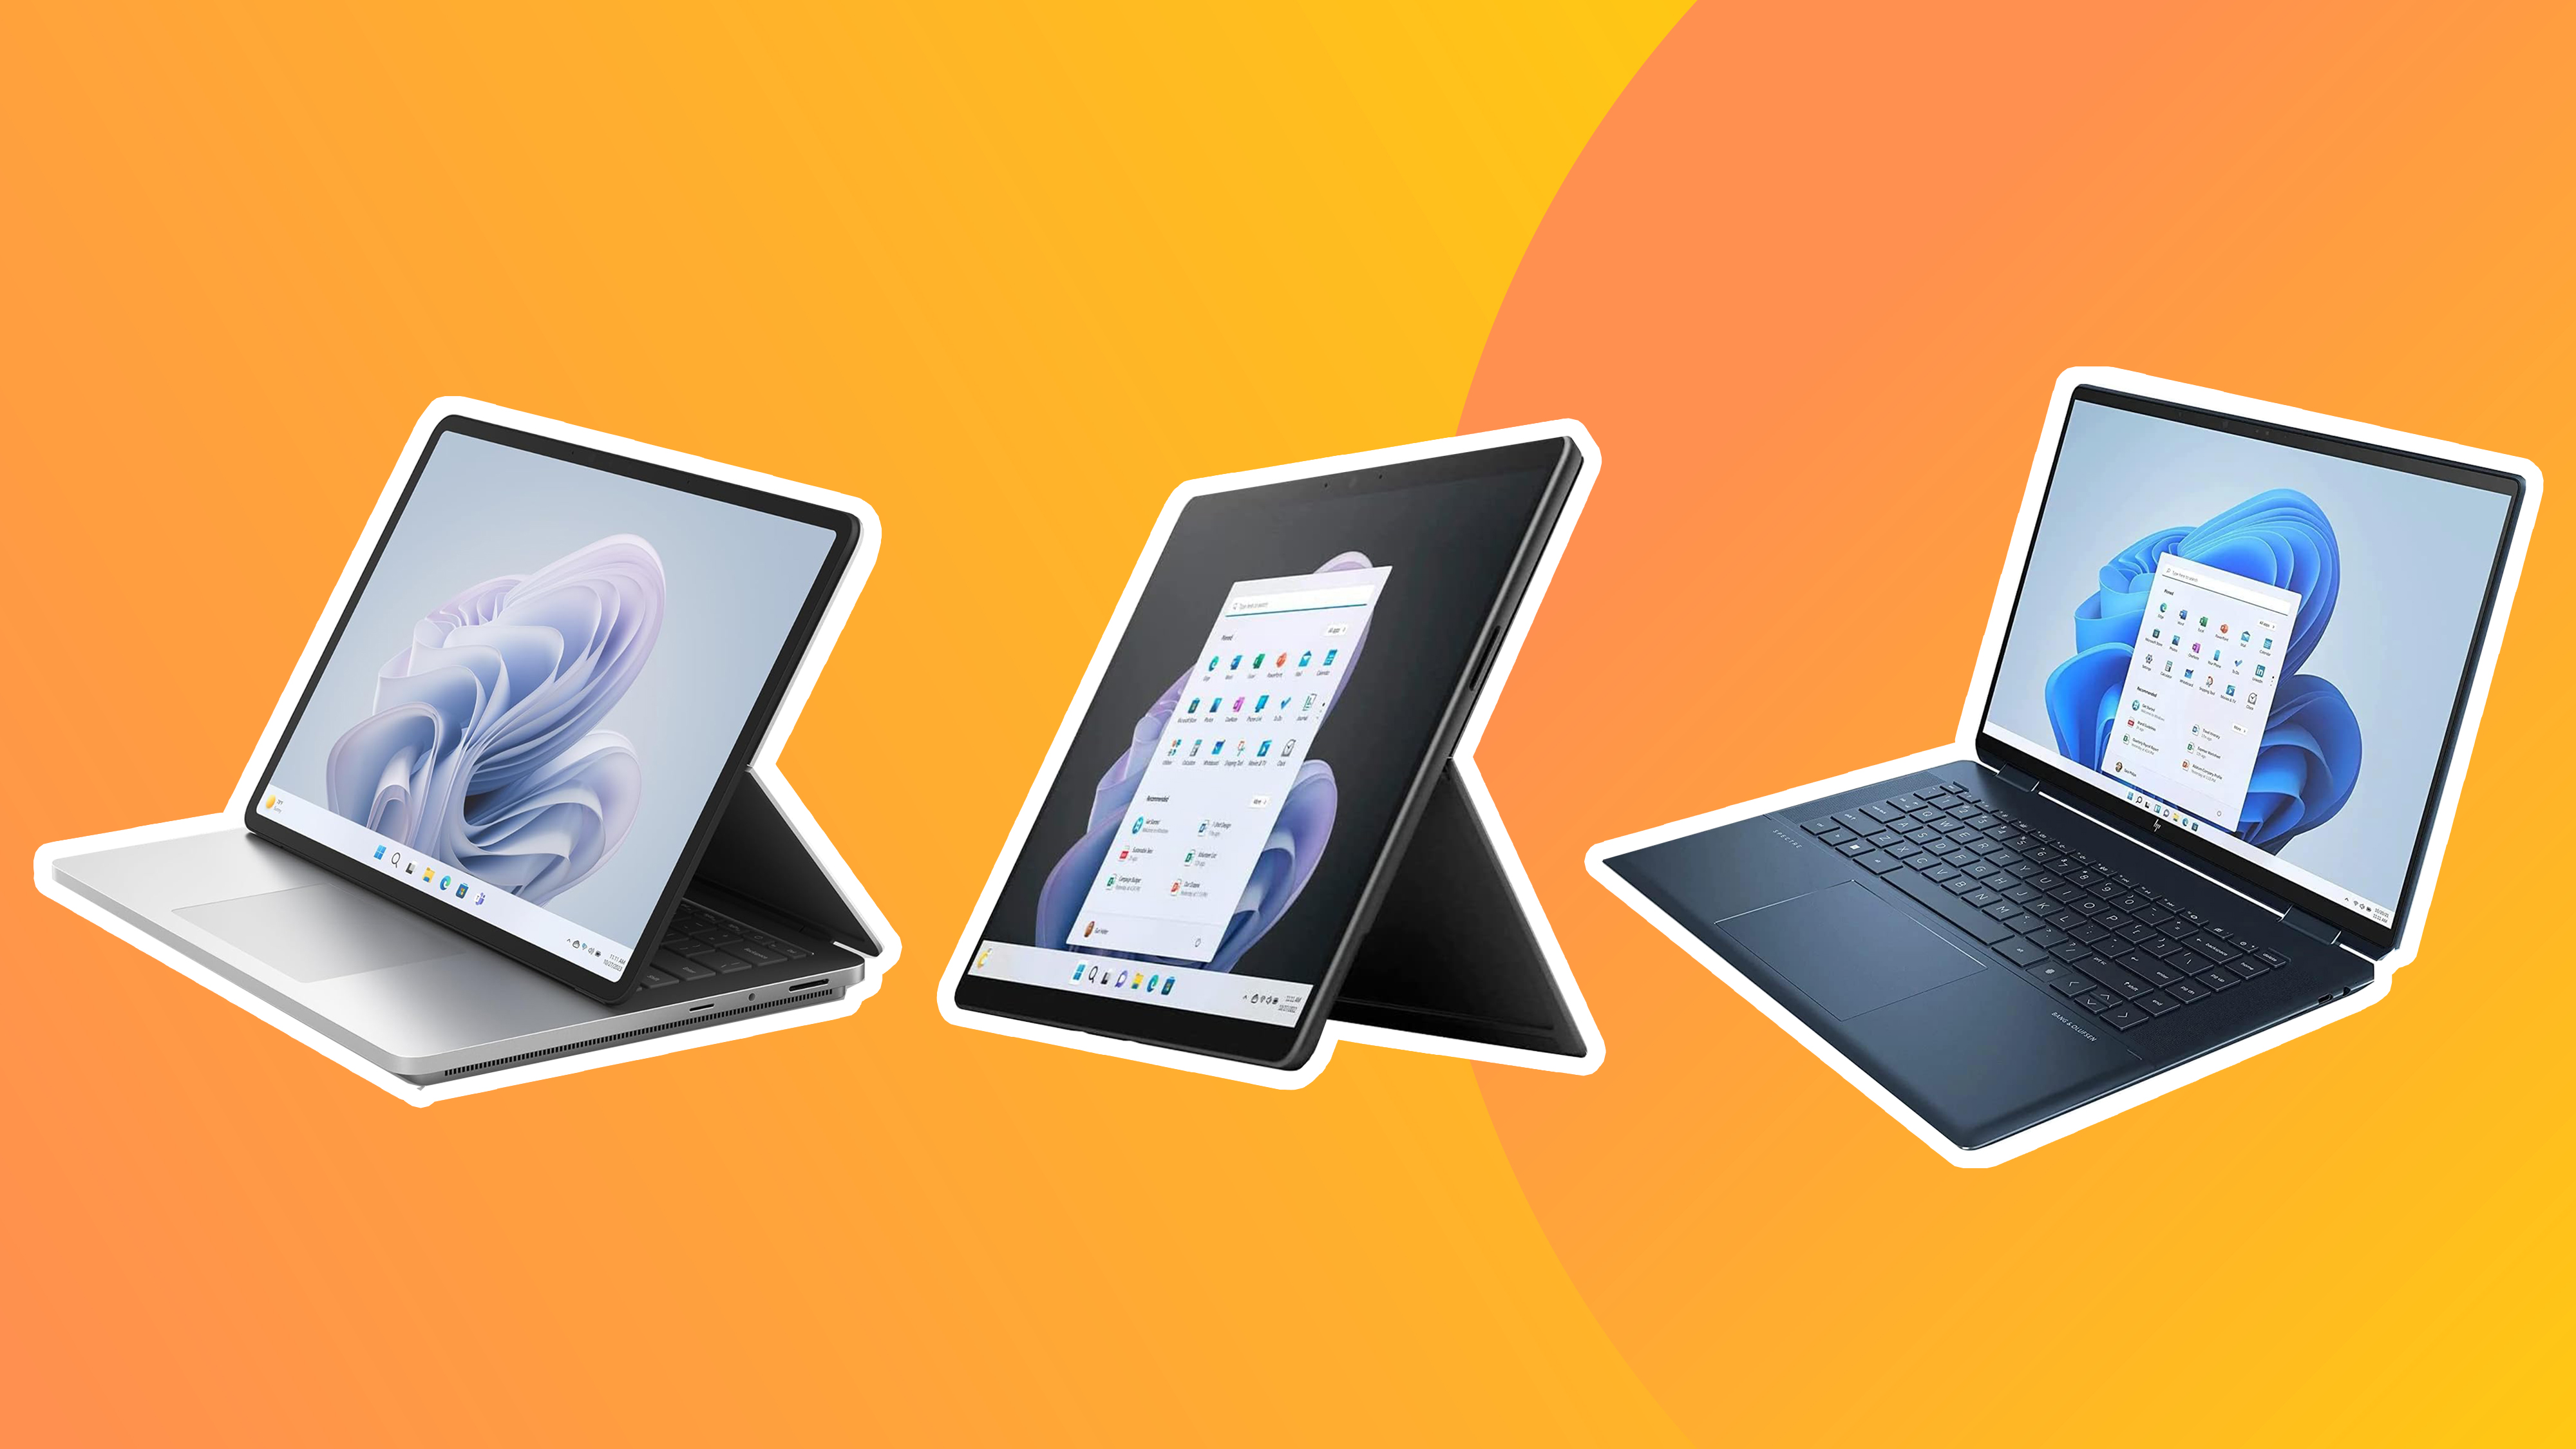 Best tablets, hybrids, laptops, and all-in-ones for Windows 8.1